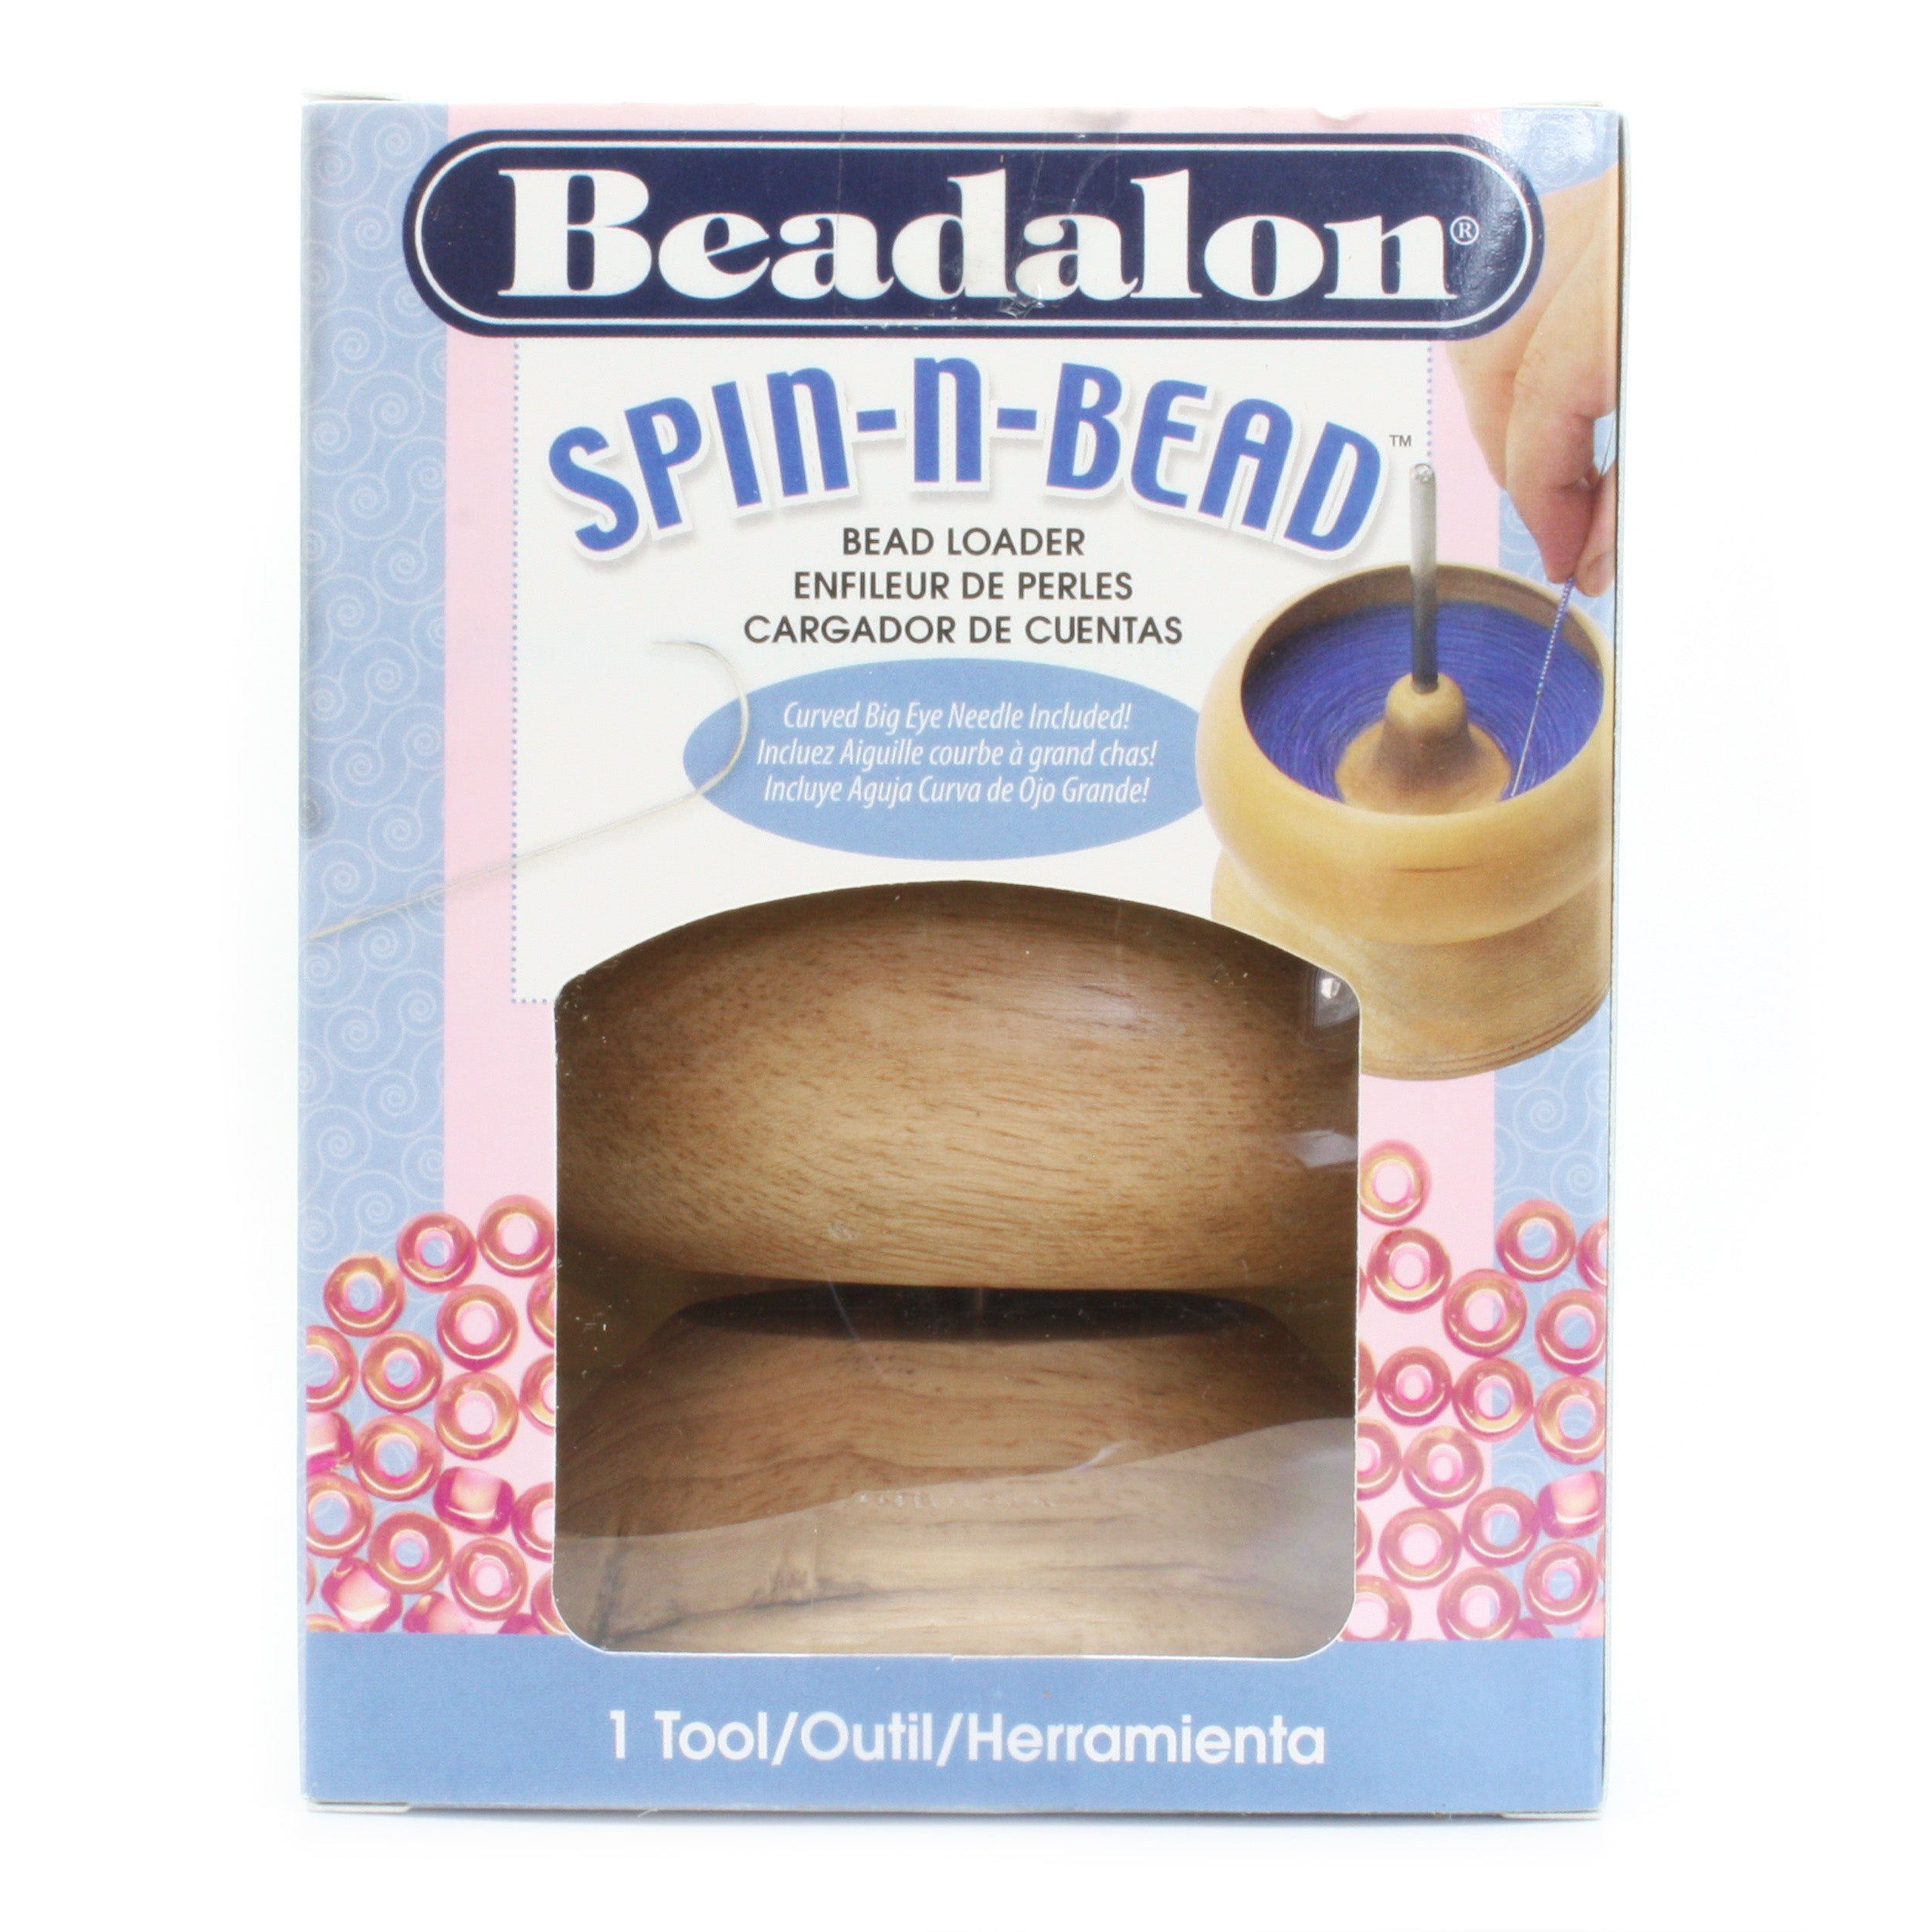 Bead Spinner Original including Curved Needle - Pack of 1